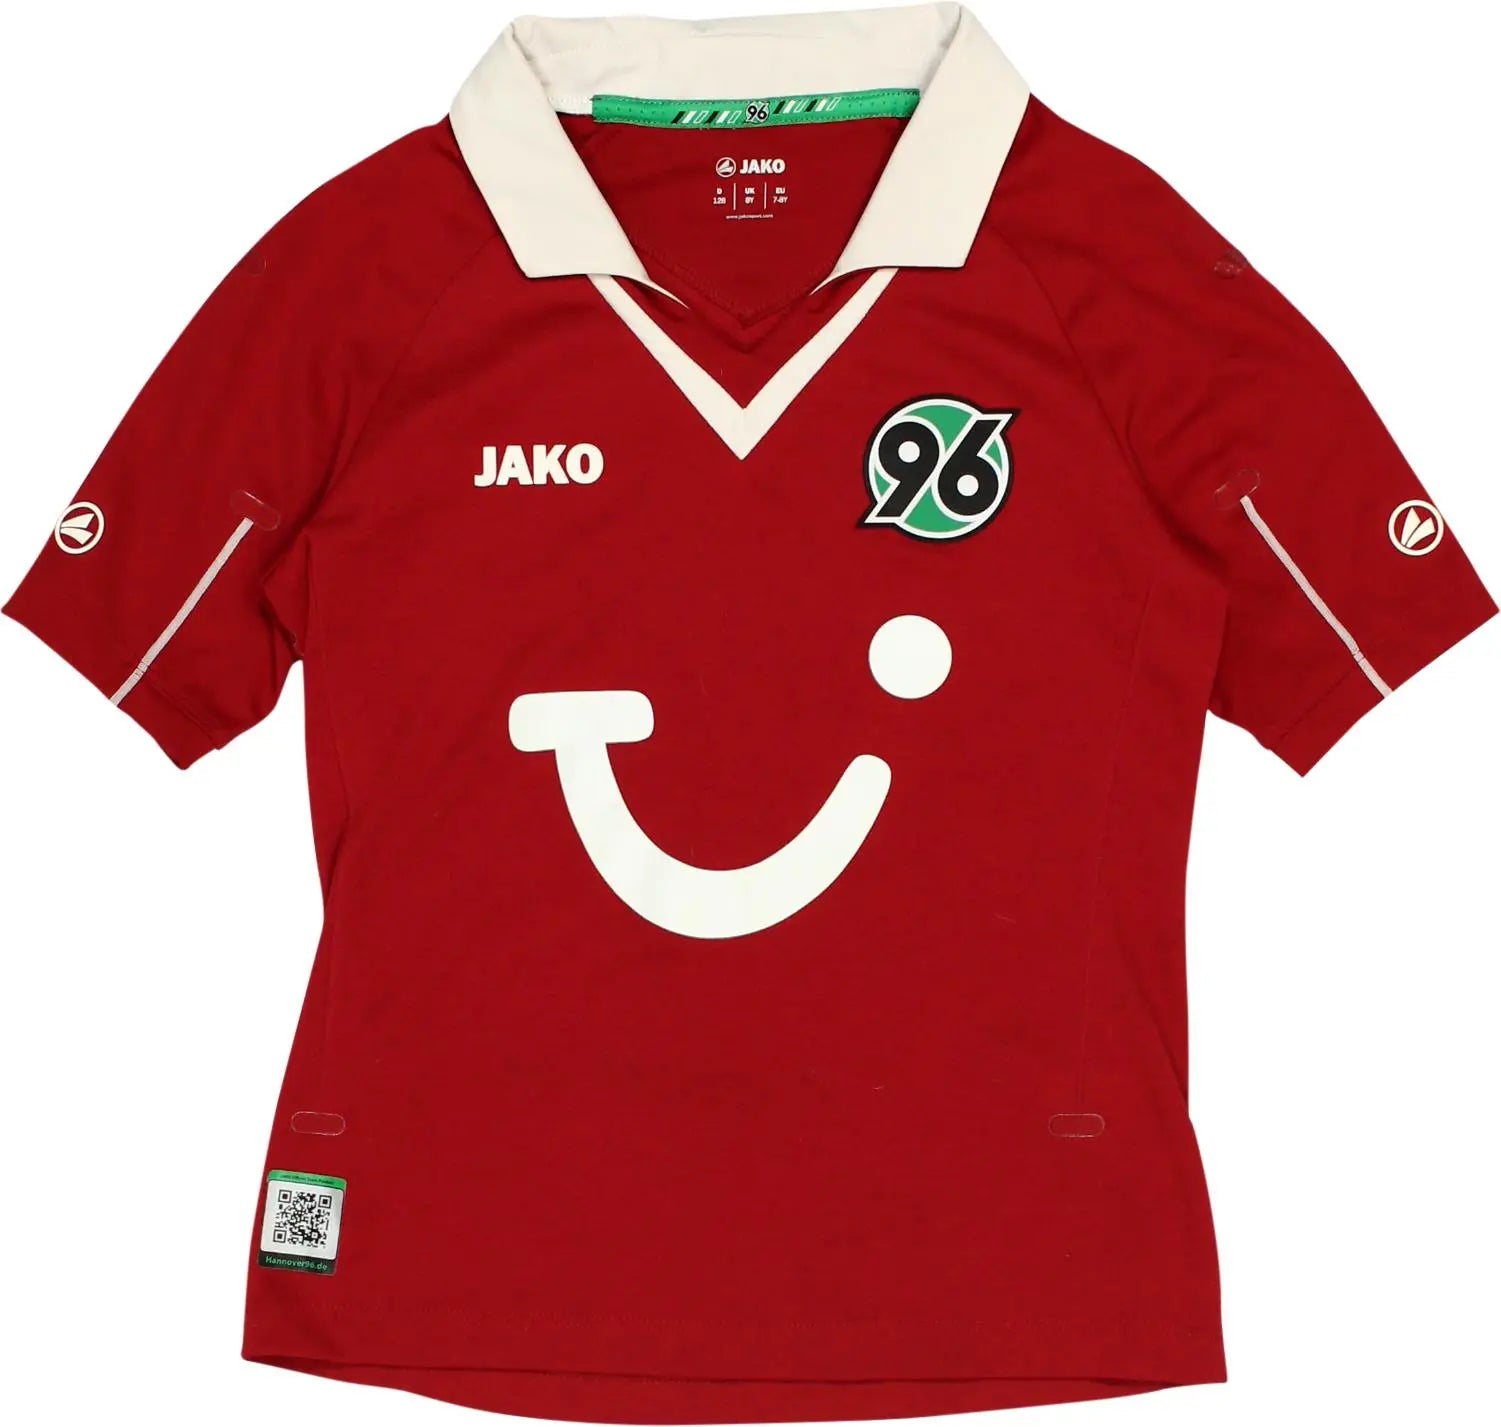 Jako - Hannover 96 Football Shirt- ThriftTale.com - Vintage and second handclothing